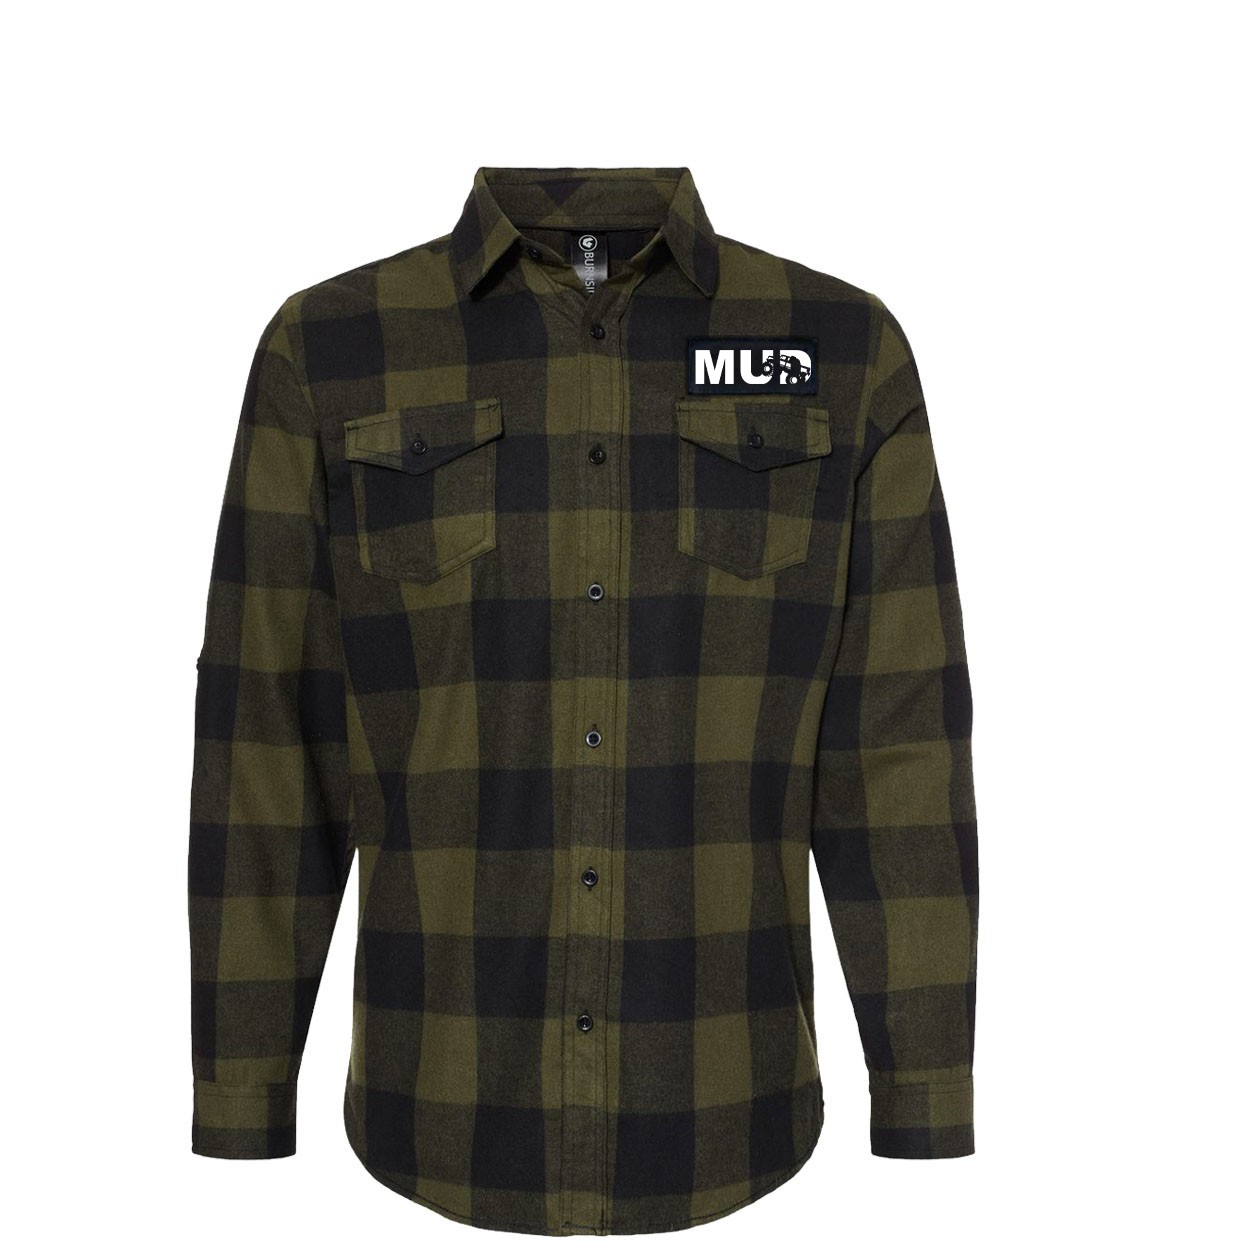 Mud Truck Logo Classic Unisex Long Sleeve Woven Patch Flannel Shirt Army/Black (White Logo)